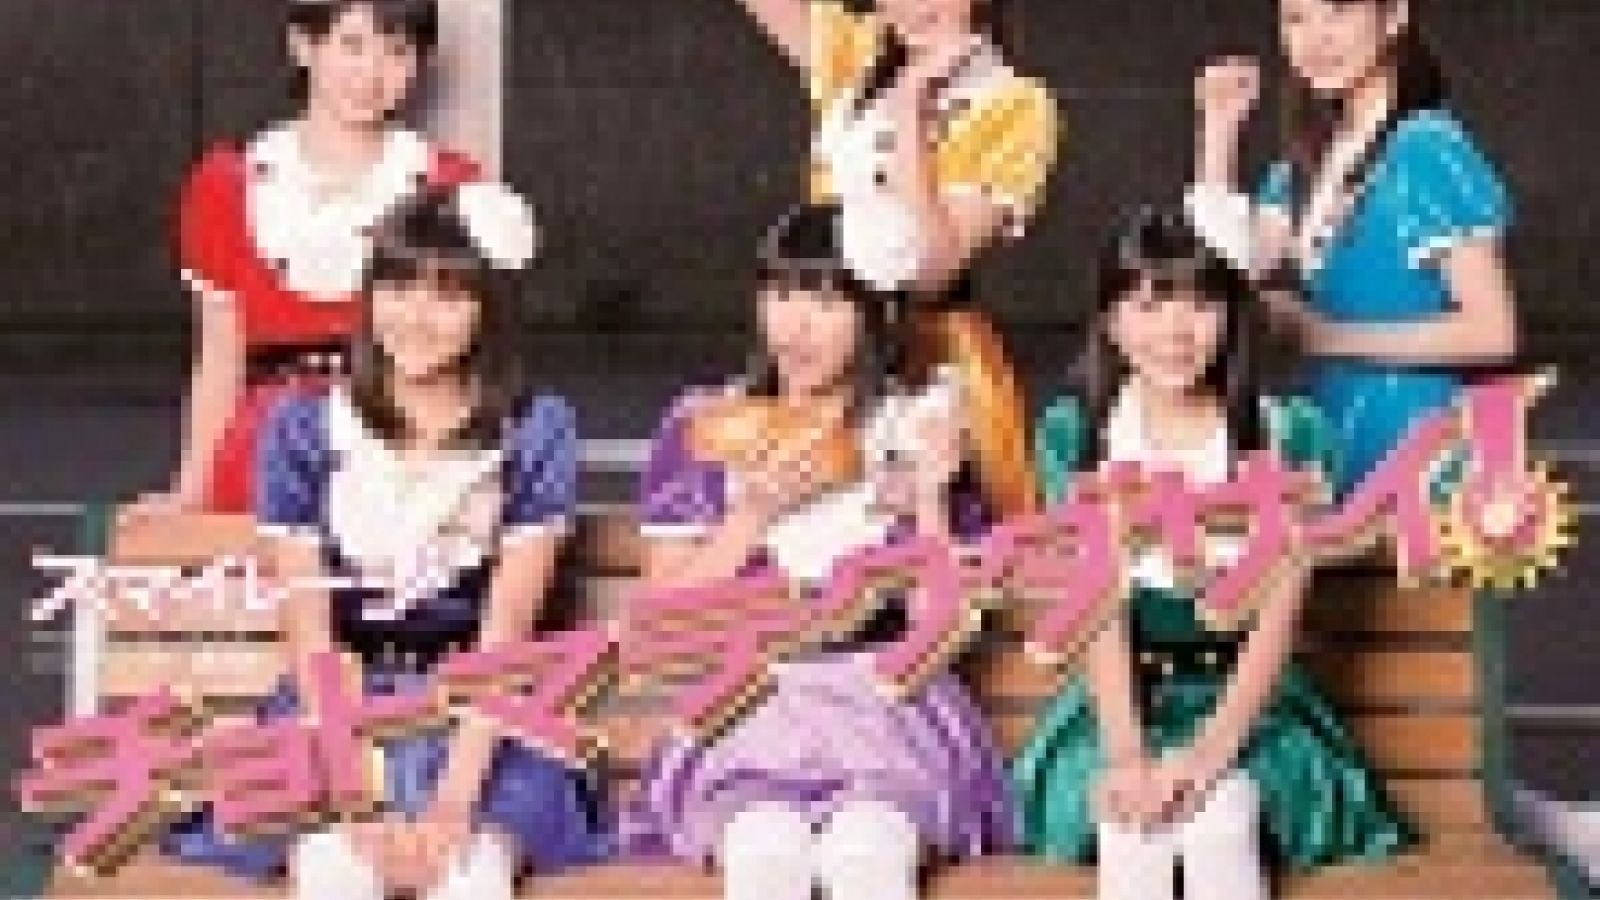 Live Blu-ray and Single from S/mileage © 